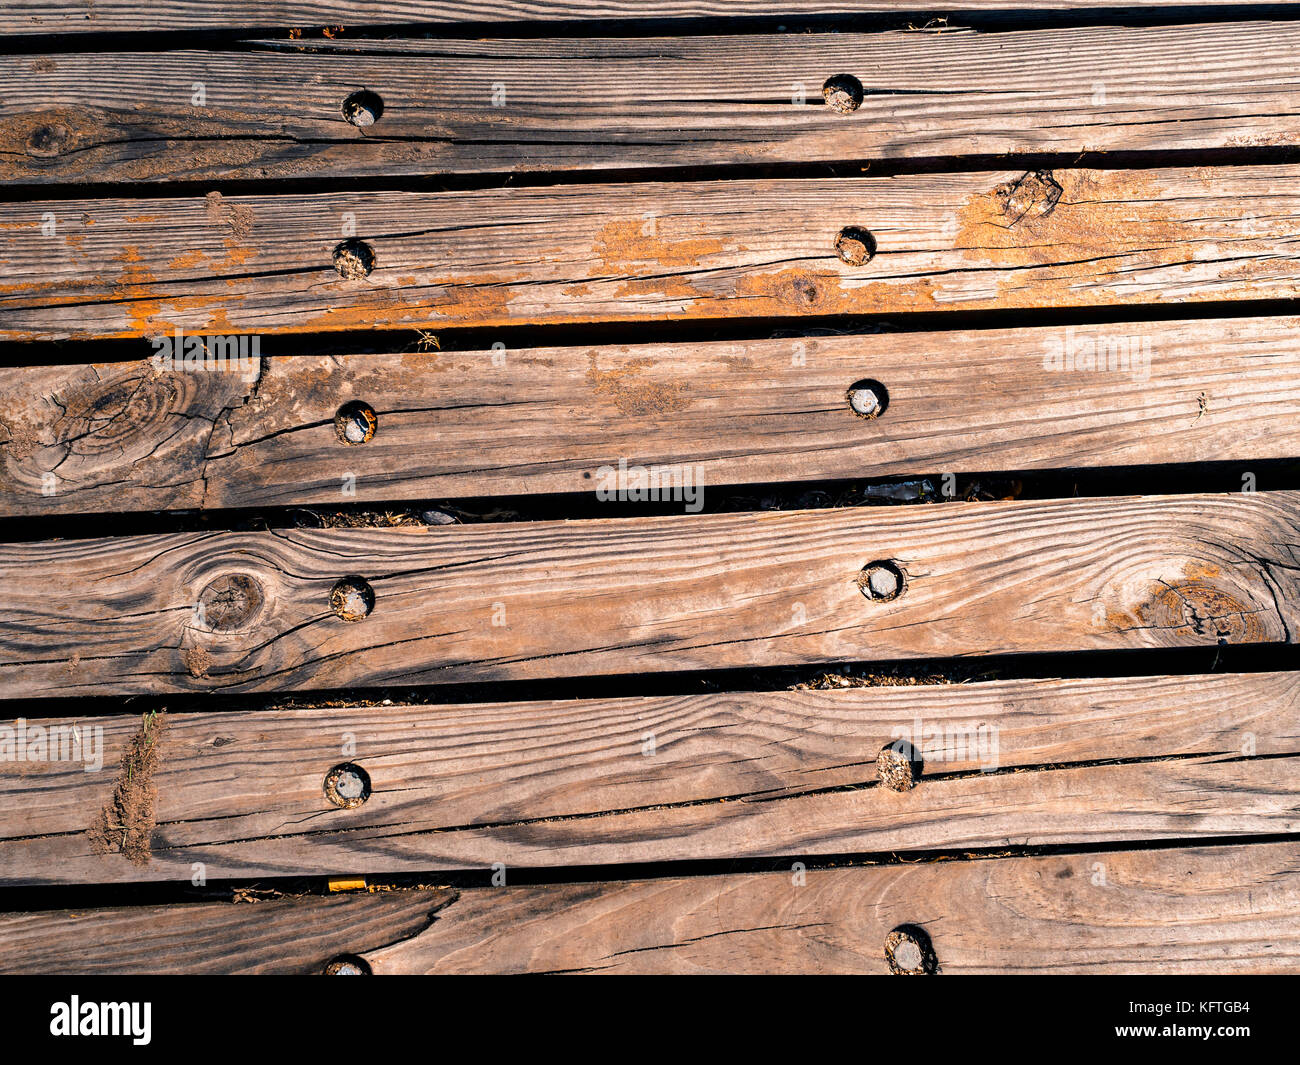 Old wooden planks gritty wood texture background Stock Photo